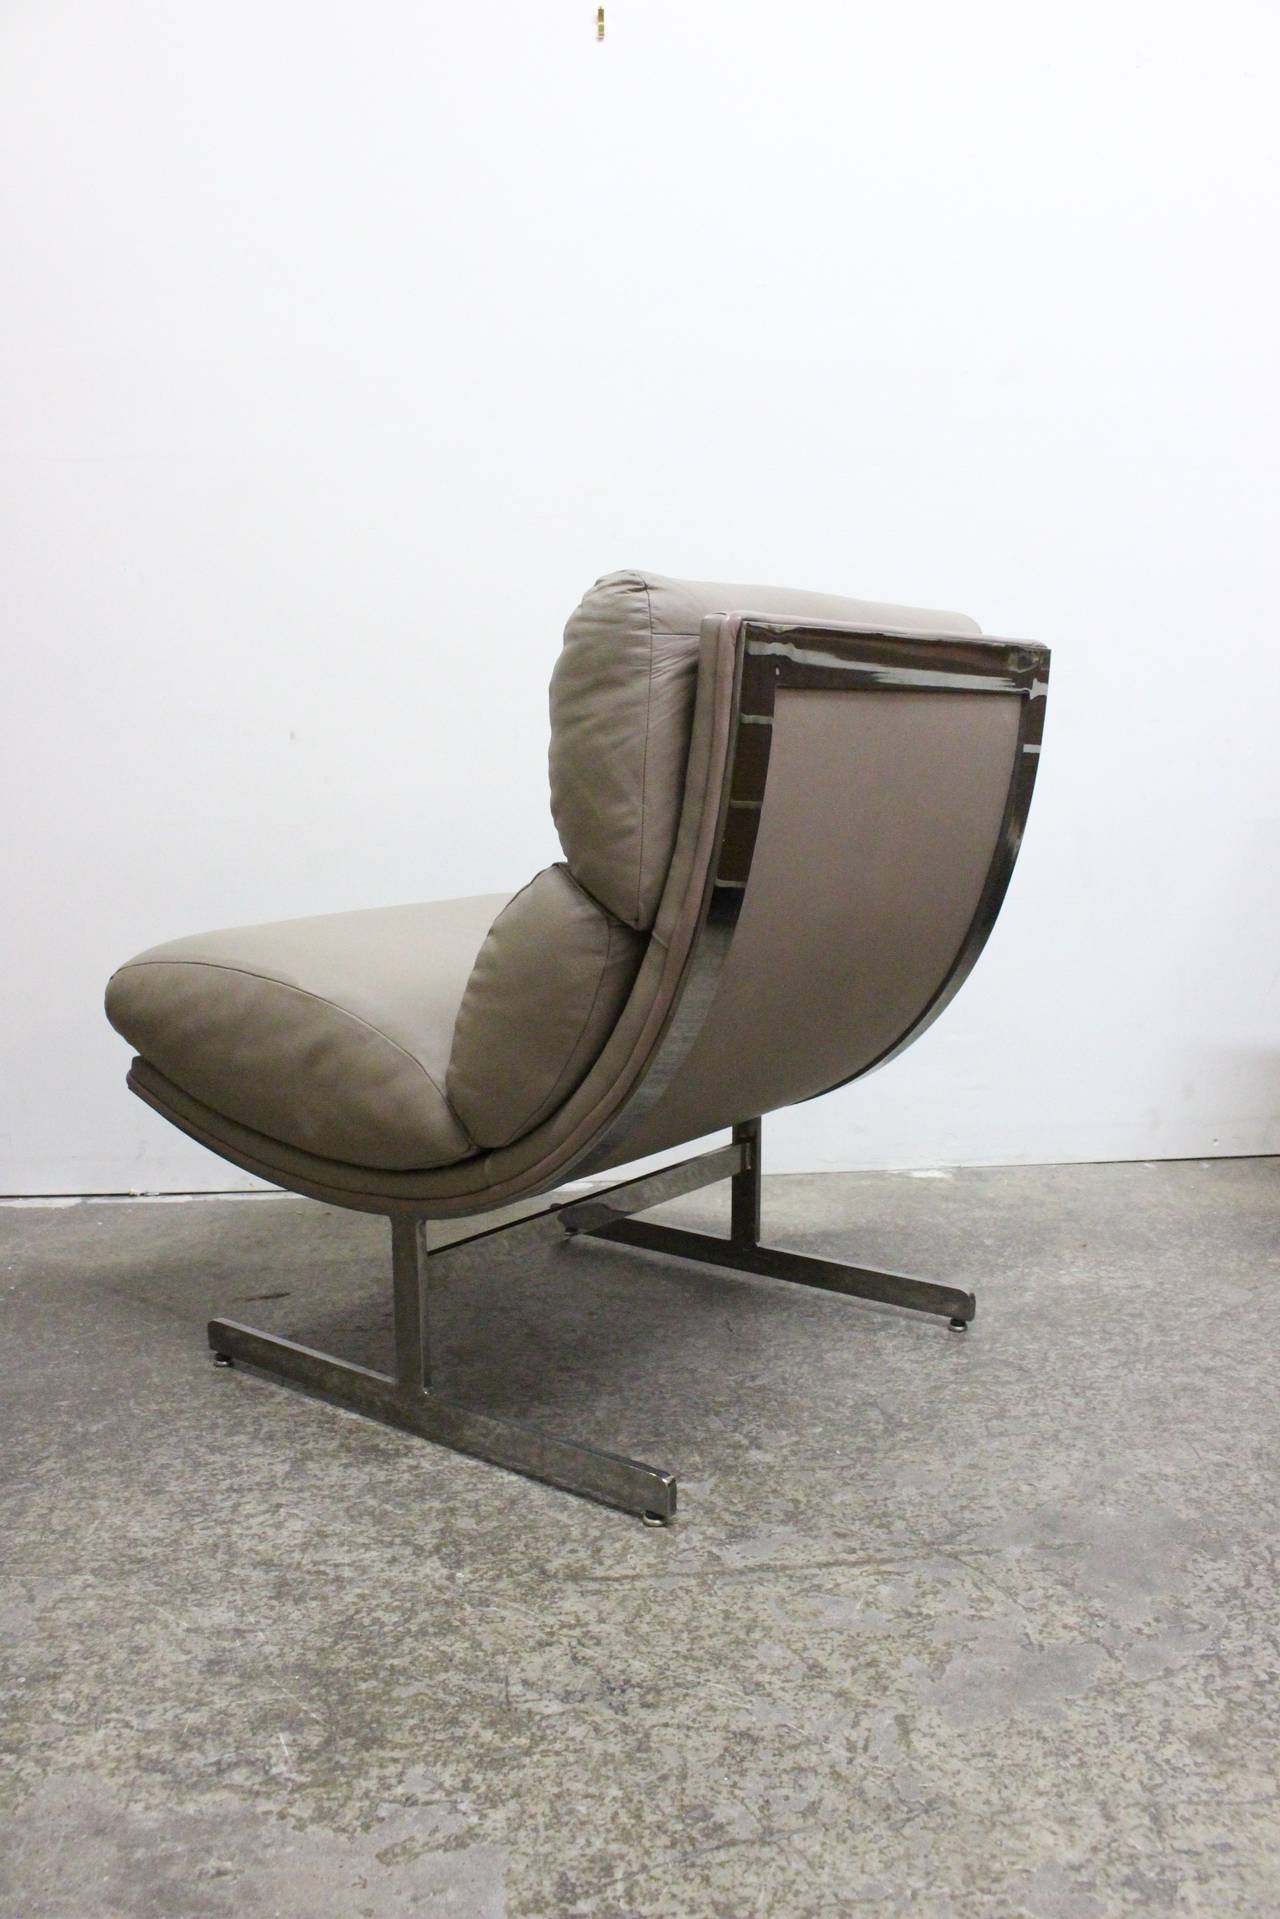 Polished Pair of Leather Chairs by Kipp Stewart for Directional